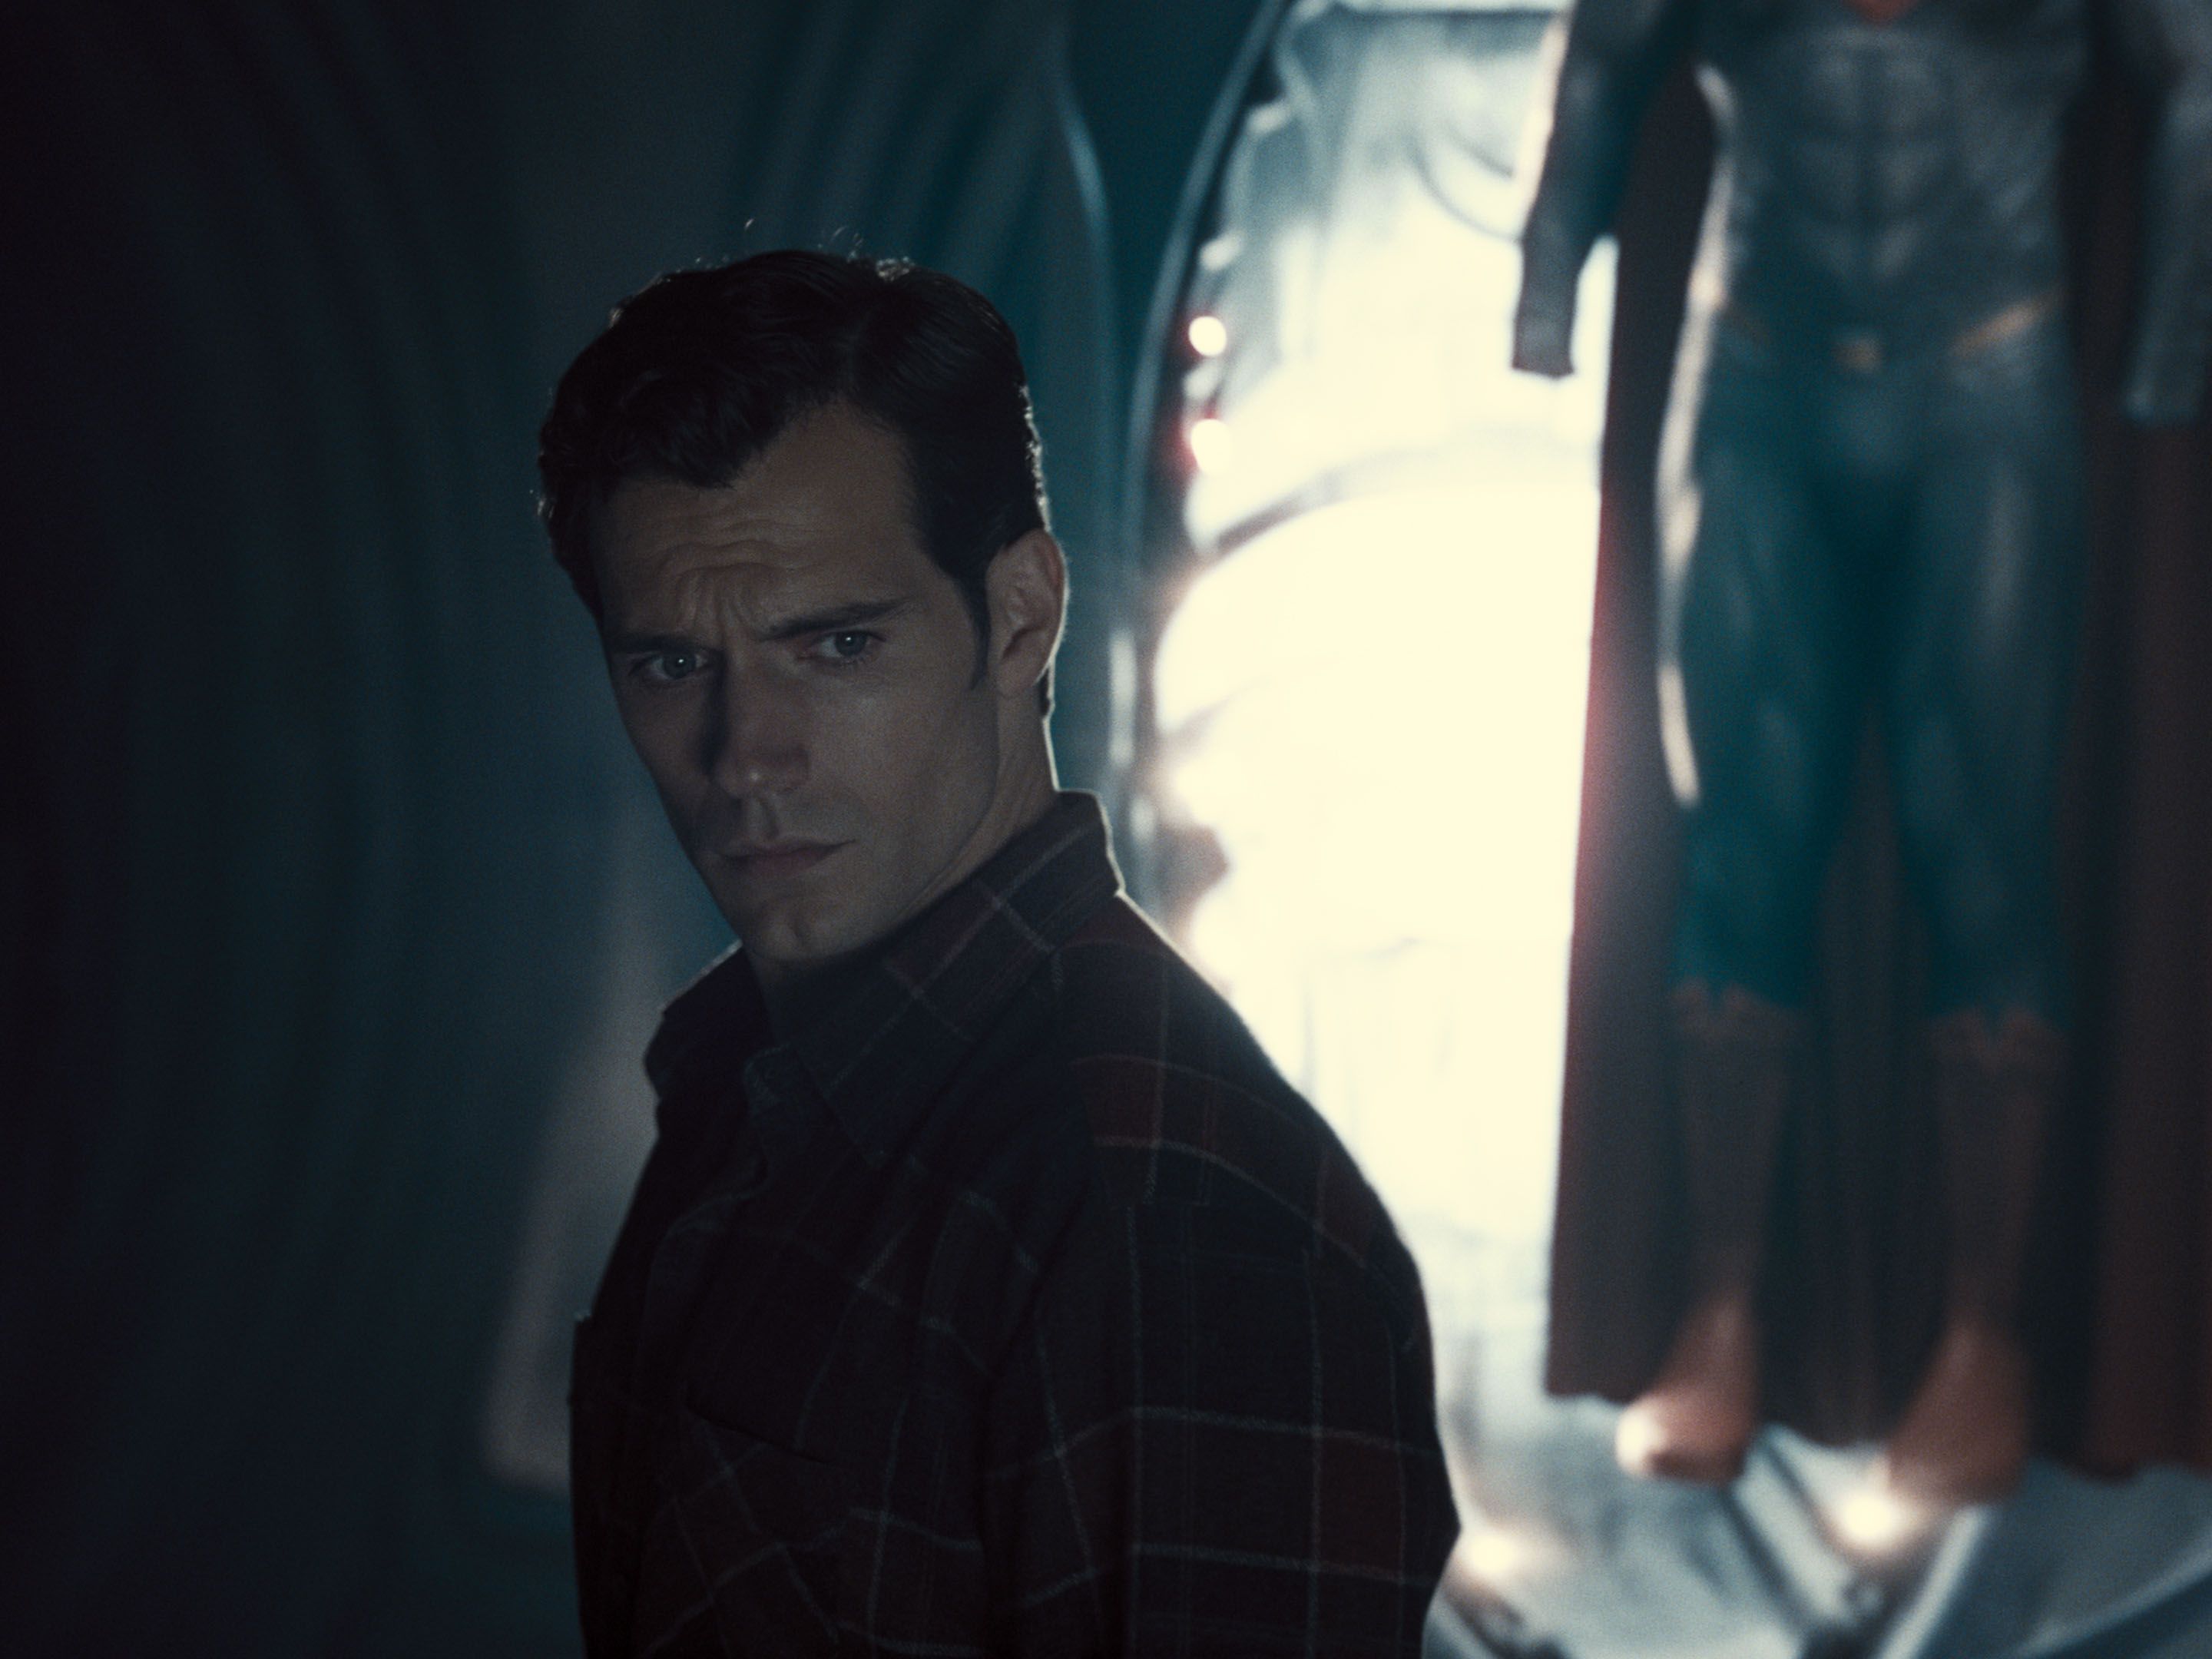 Henry Cavill as Clark Kent in Zack Snyder's Justice League